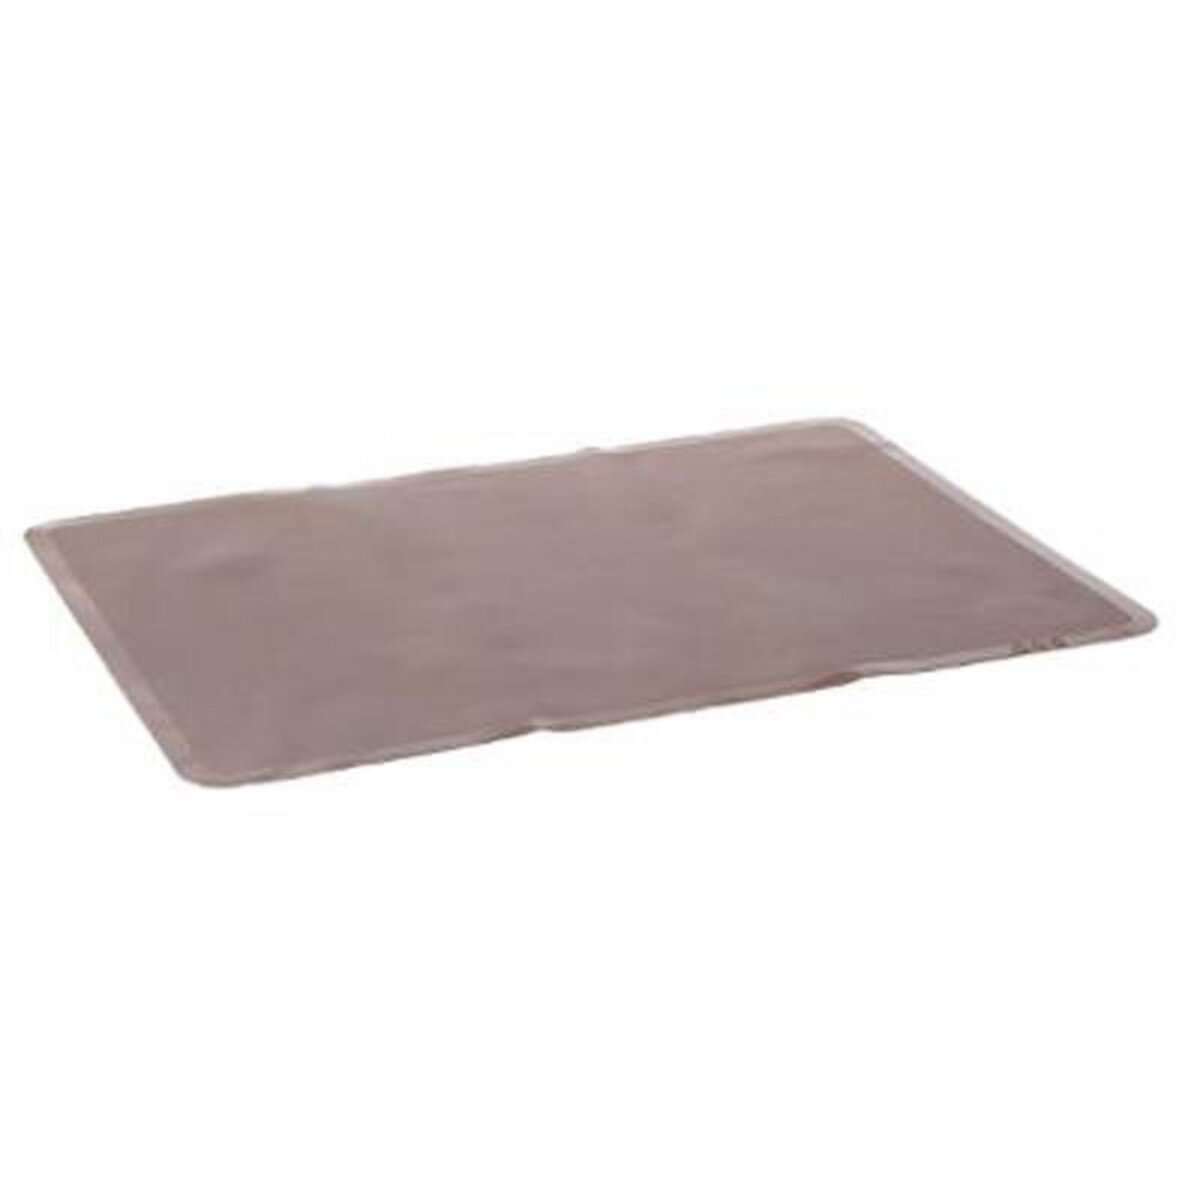 Feuille de Cuisson Silicone Gourmand 38cm Taupe pas cher 